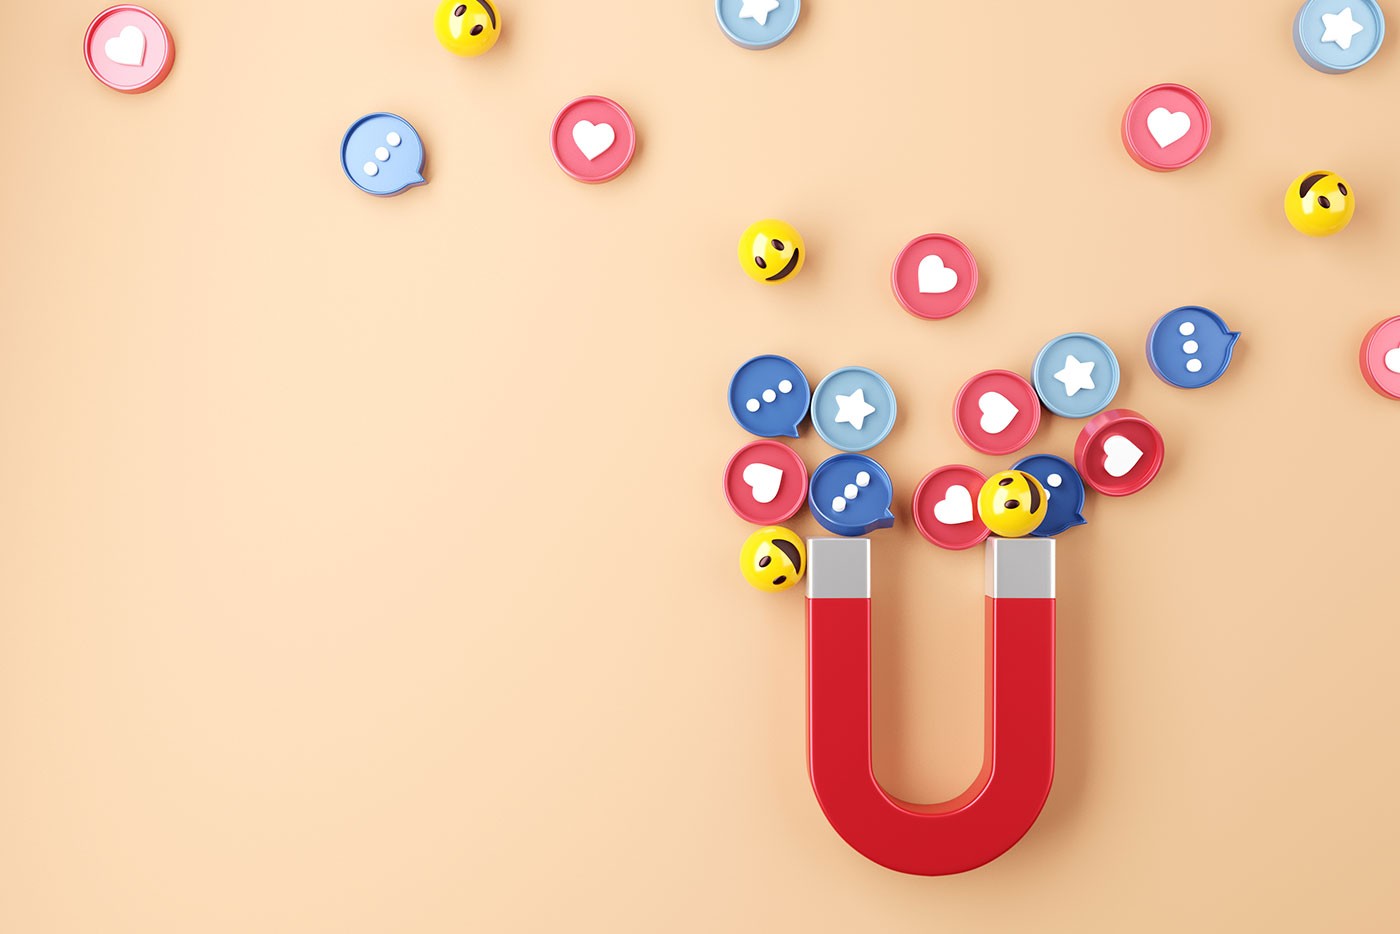 Pro Tips to Increasing Your Social Media Engagement